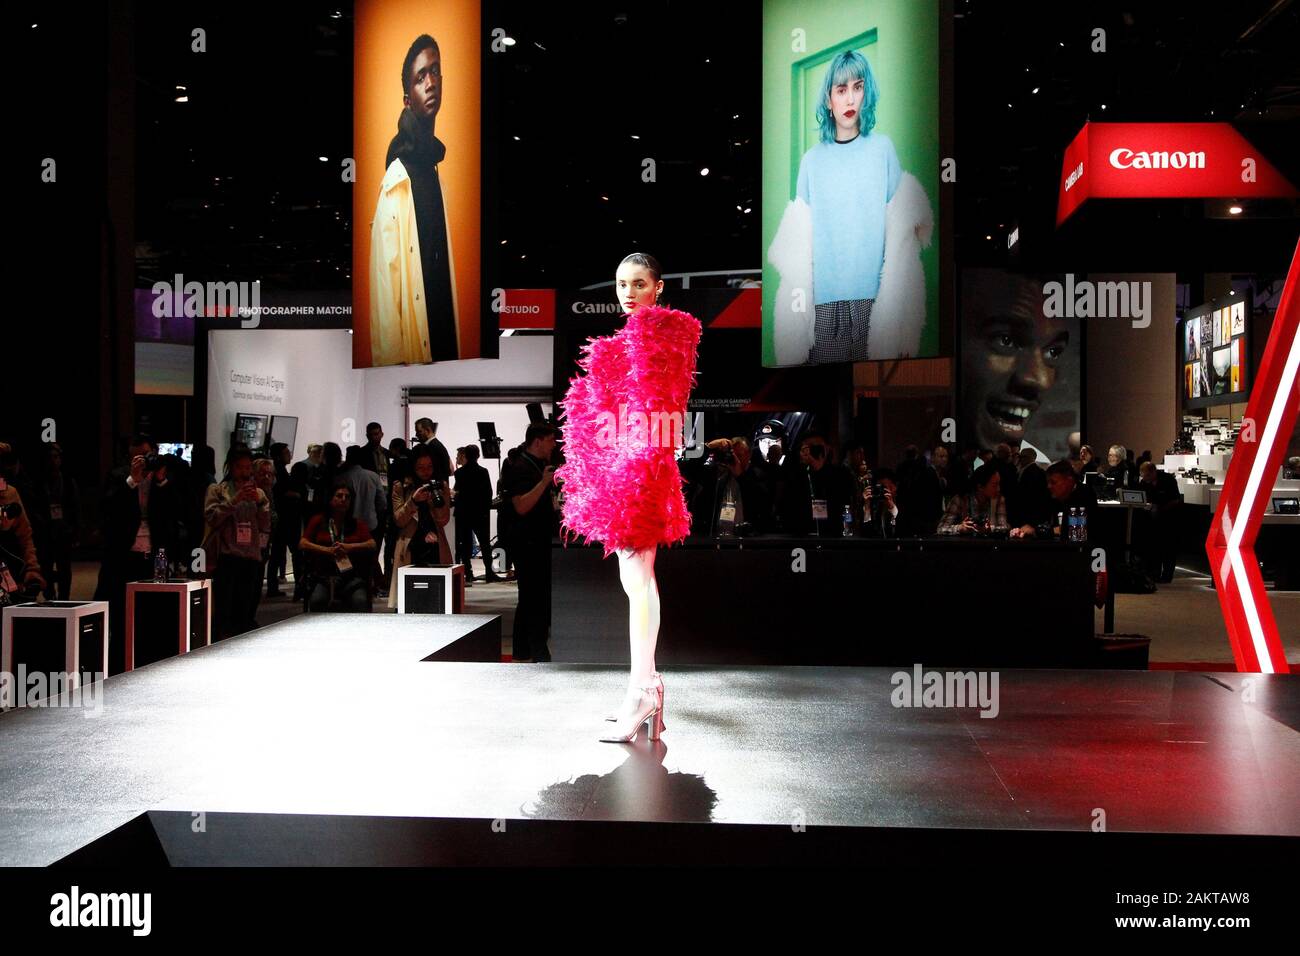 Las Vegas, United States. 10th Jan, 2020. A model walks the stage at the  Canon booth during the 2020 International CES, at the Las Vegas Convention  Center in Las Vegas, Nevada on